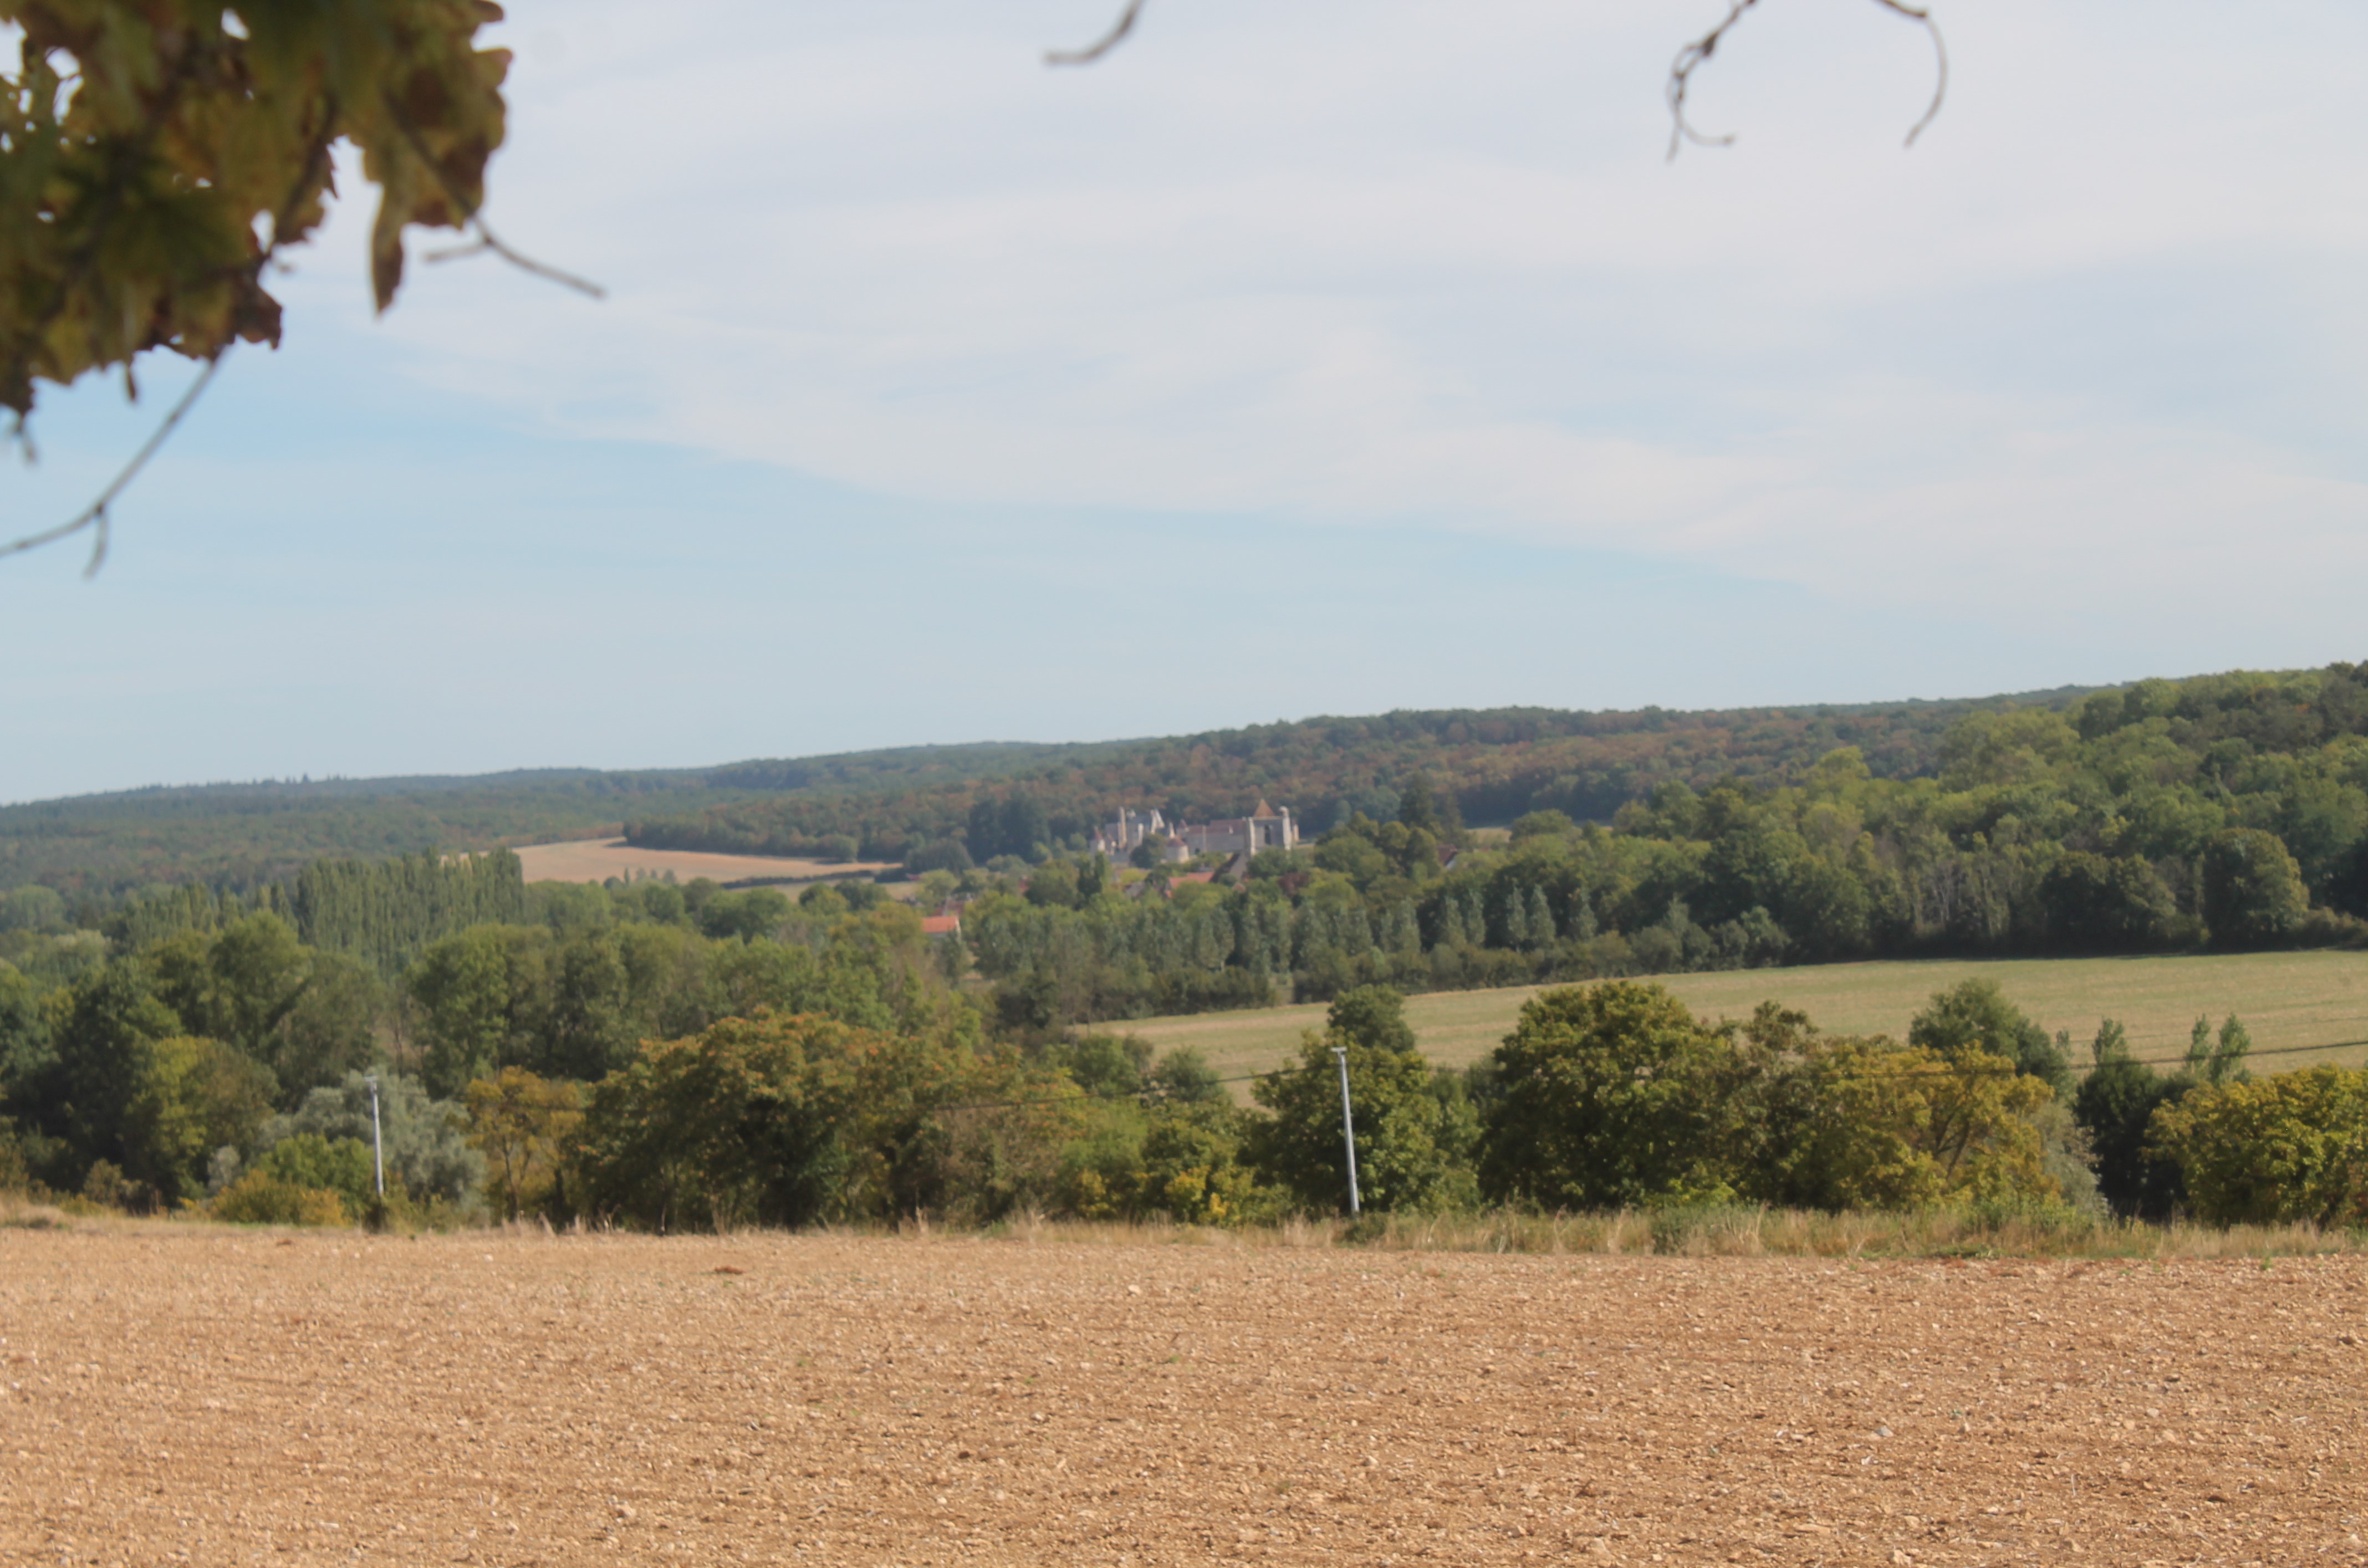 From Crain looking back towards Lucy-sur-yonne (from Nicholas Vincent)